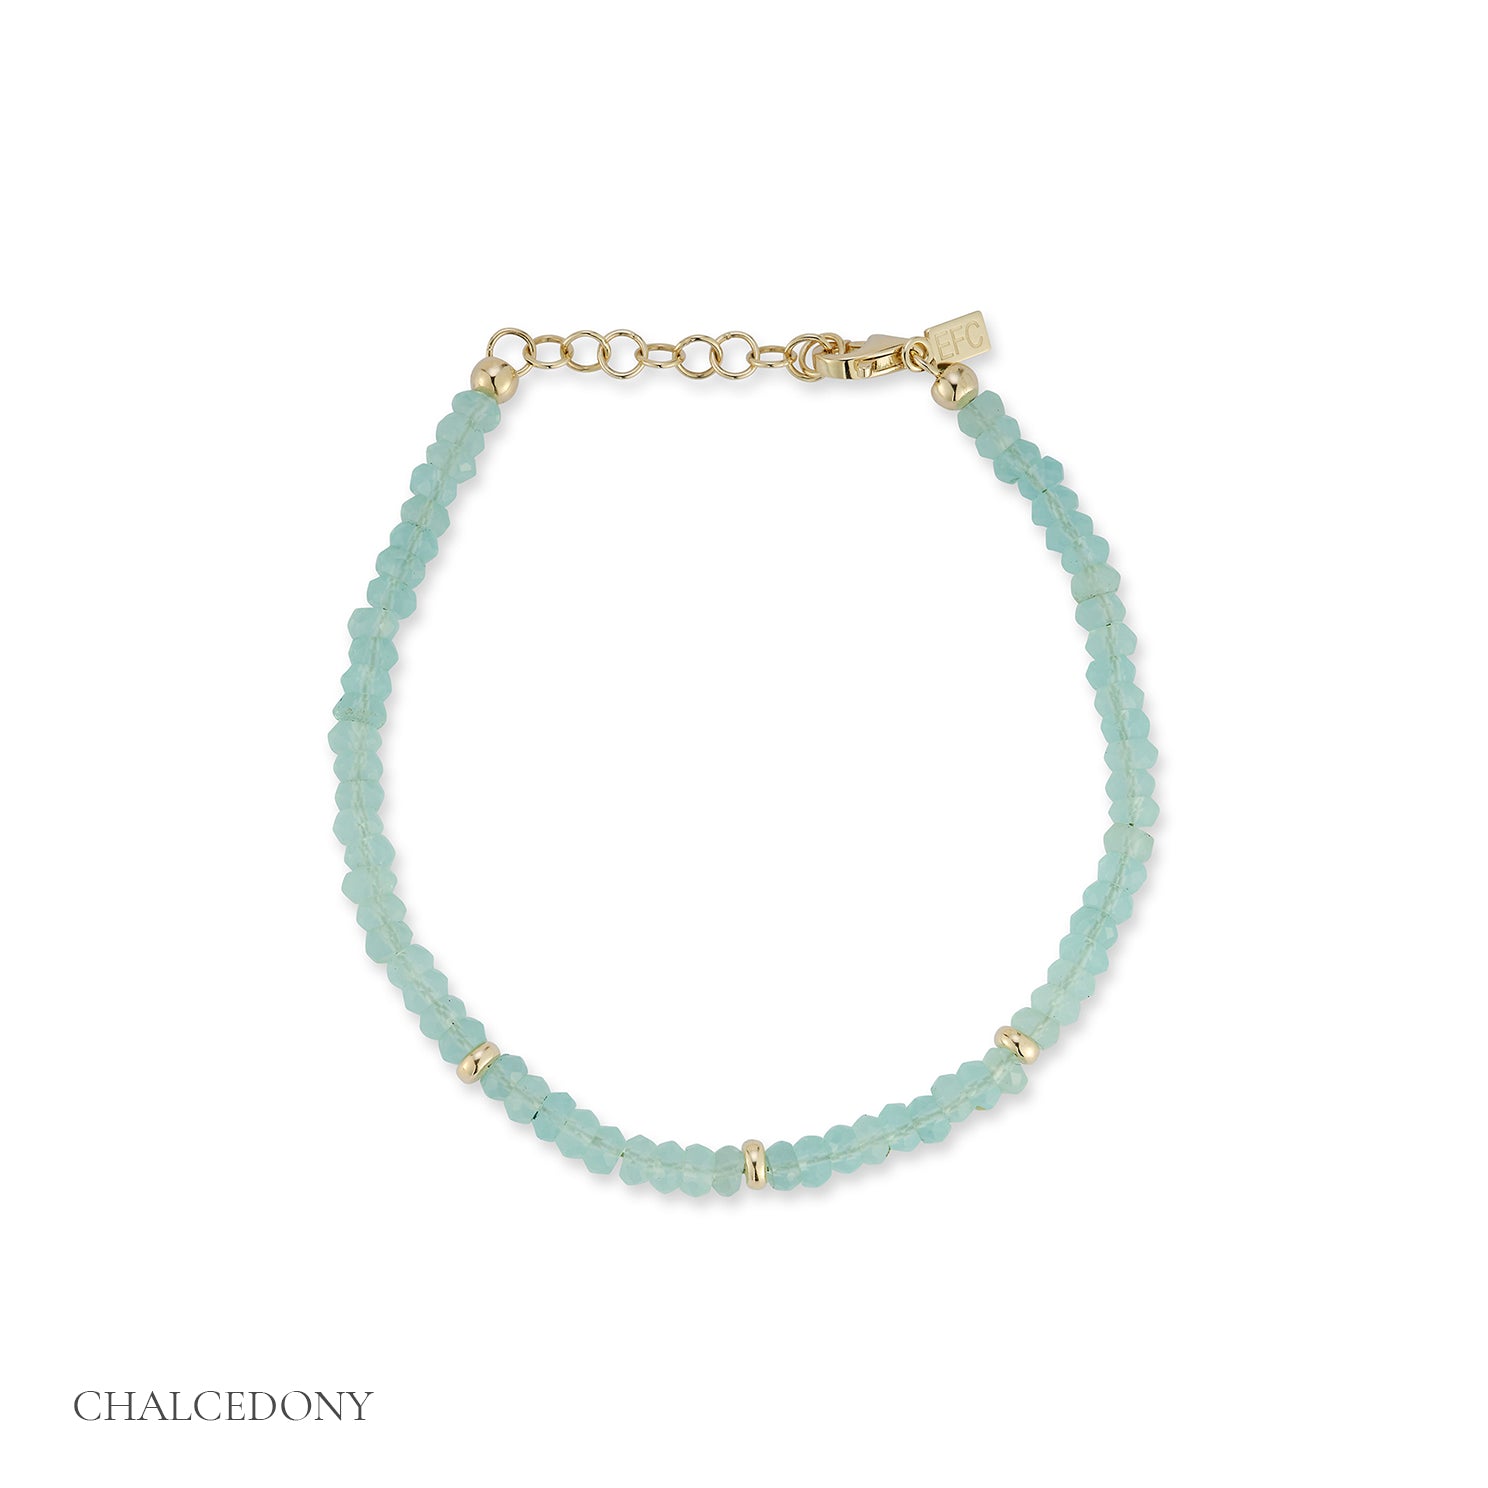 Birthstone Bead Bracelet In Chalcedony with 14k yellow gold chain March Option